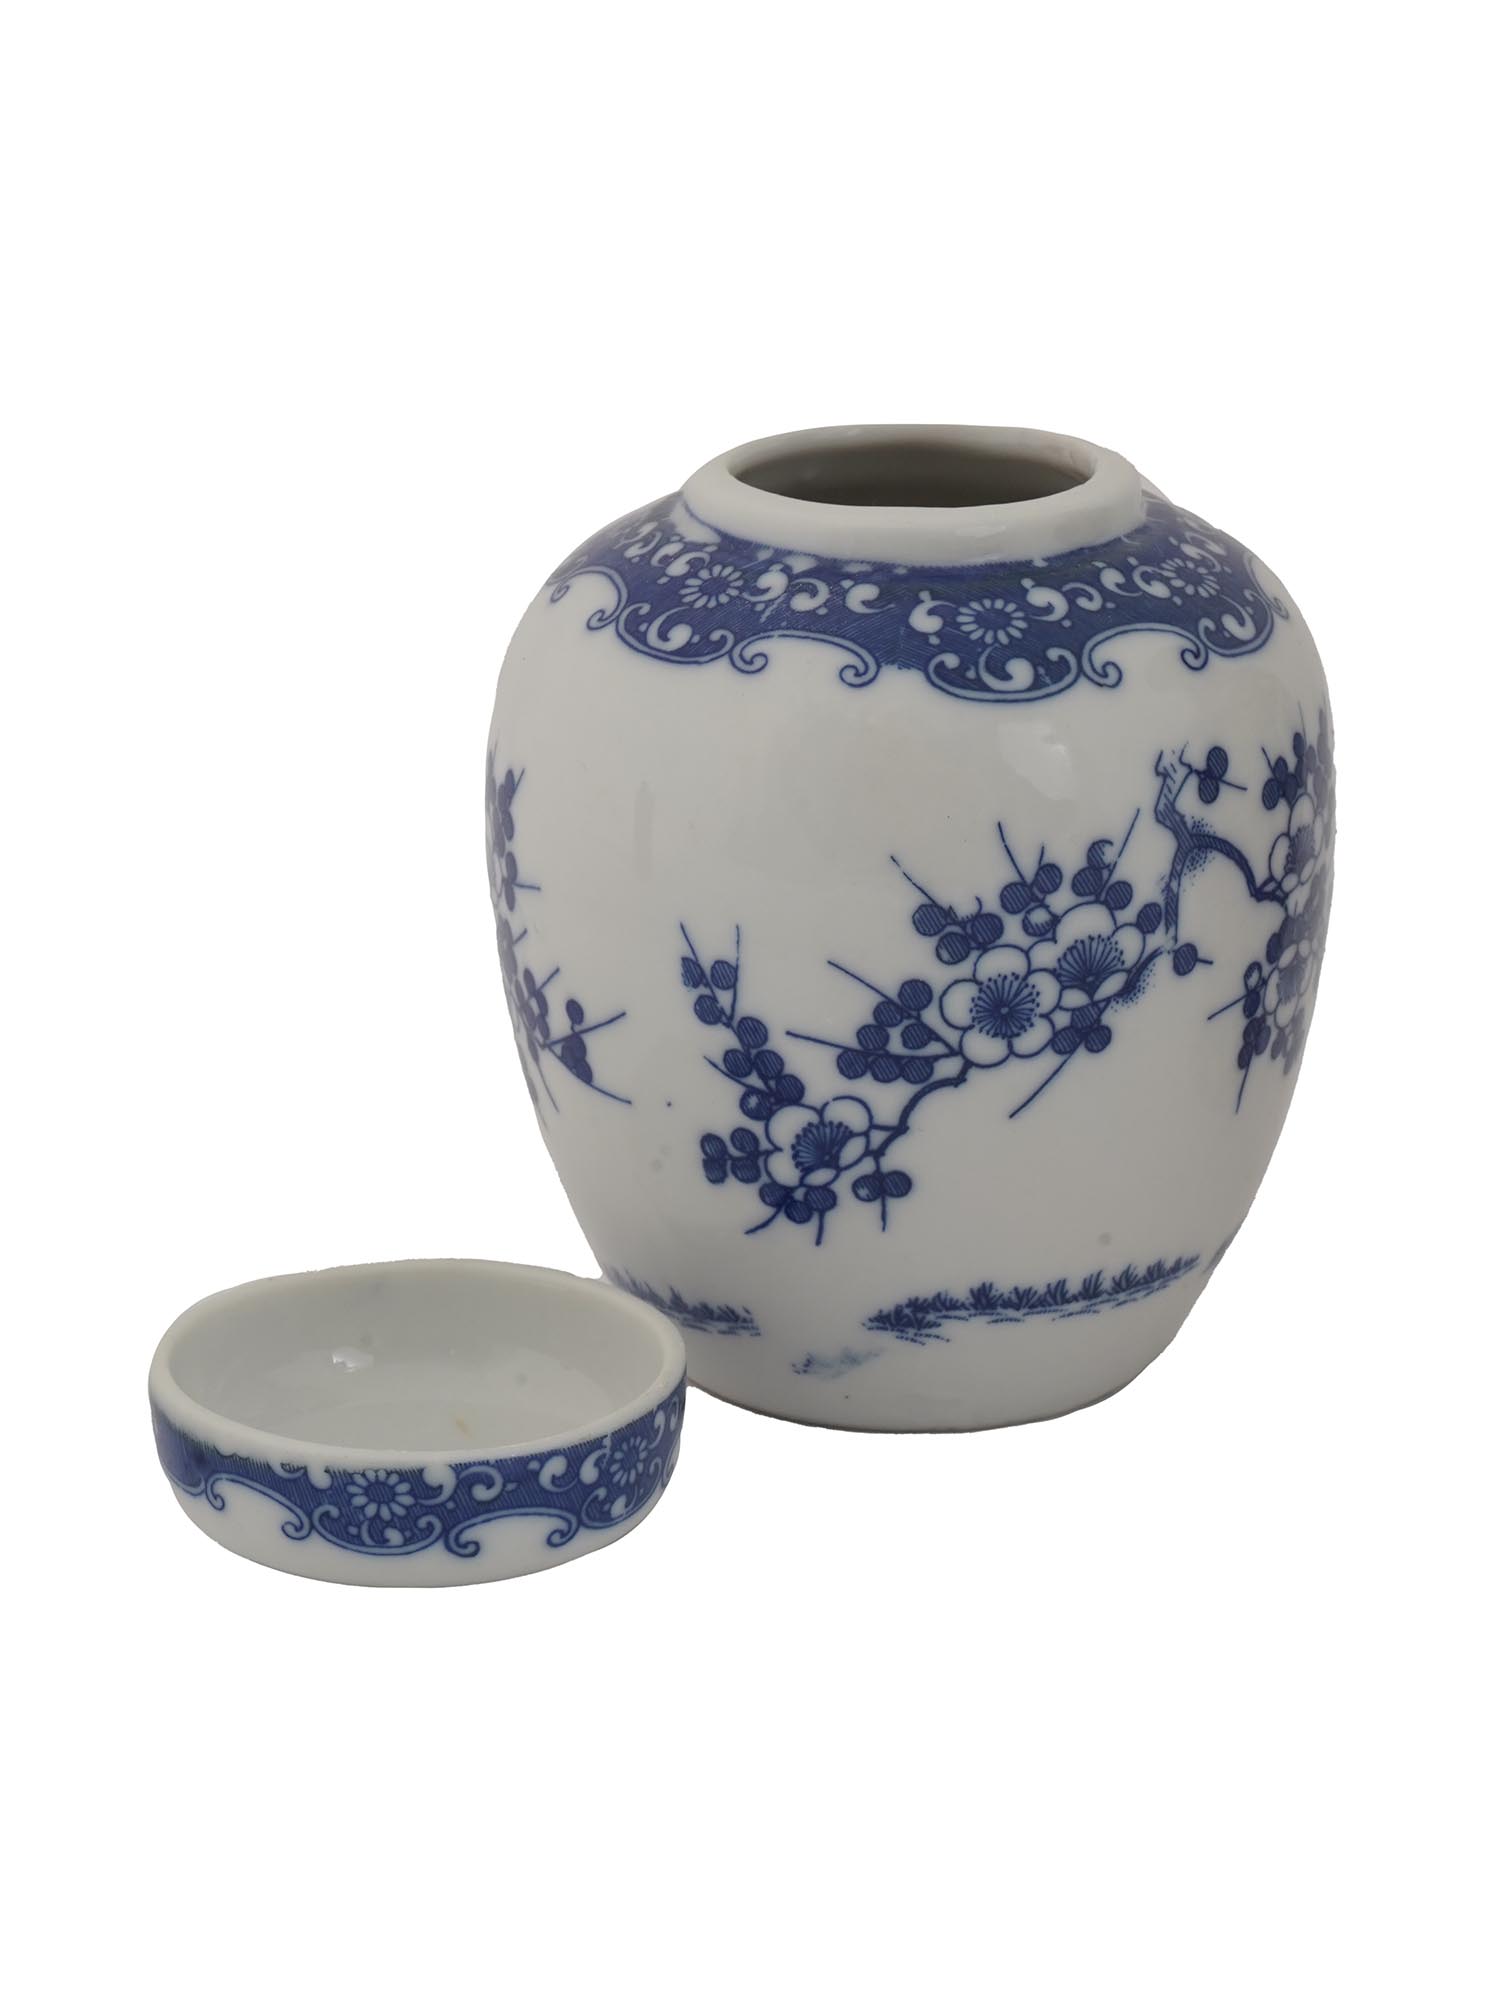 COLLECTION OF CHINESE PORCELAIN VASES BOWLS JAR PIC-3